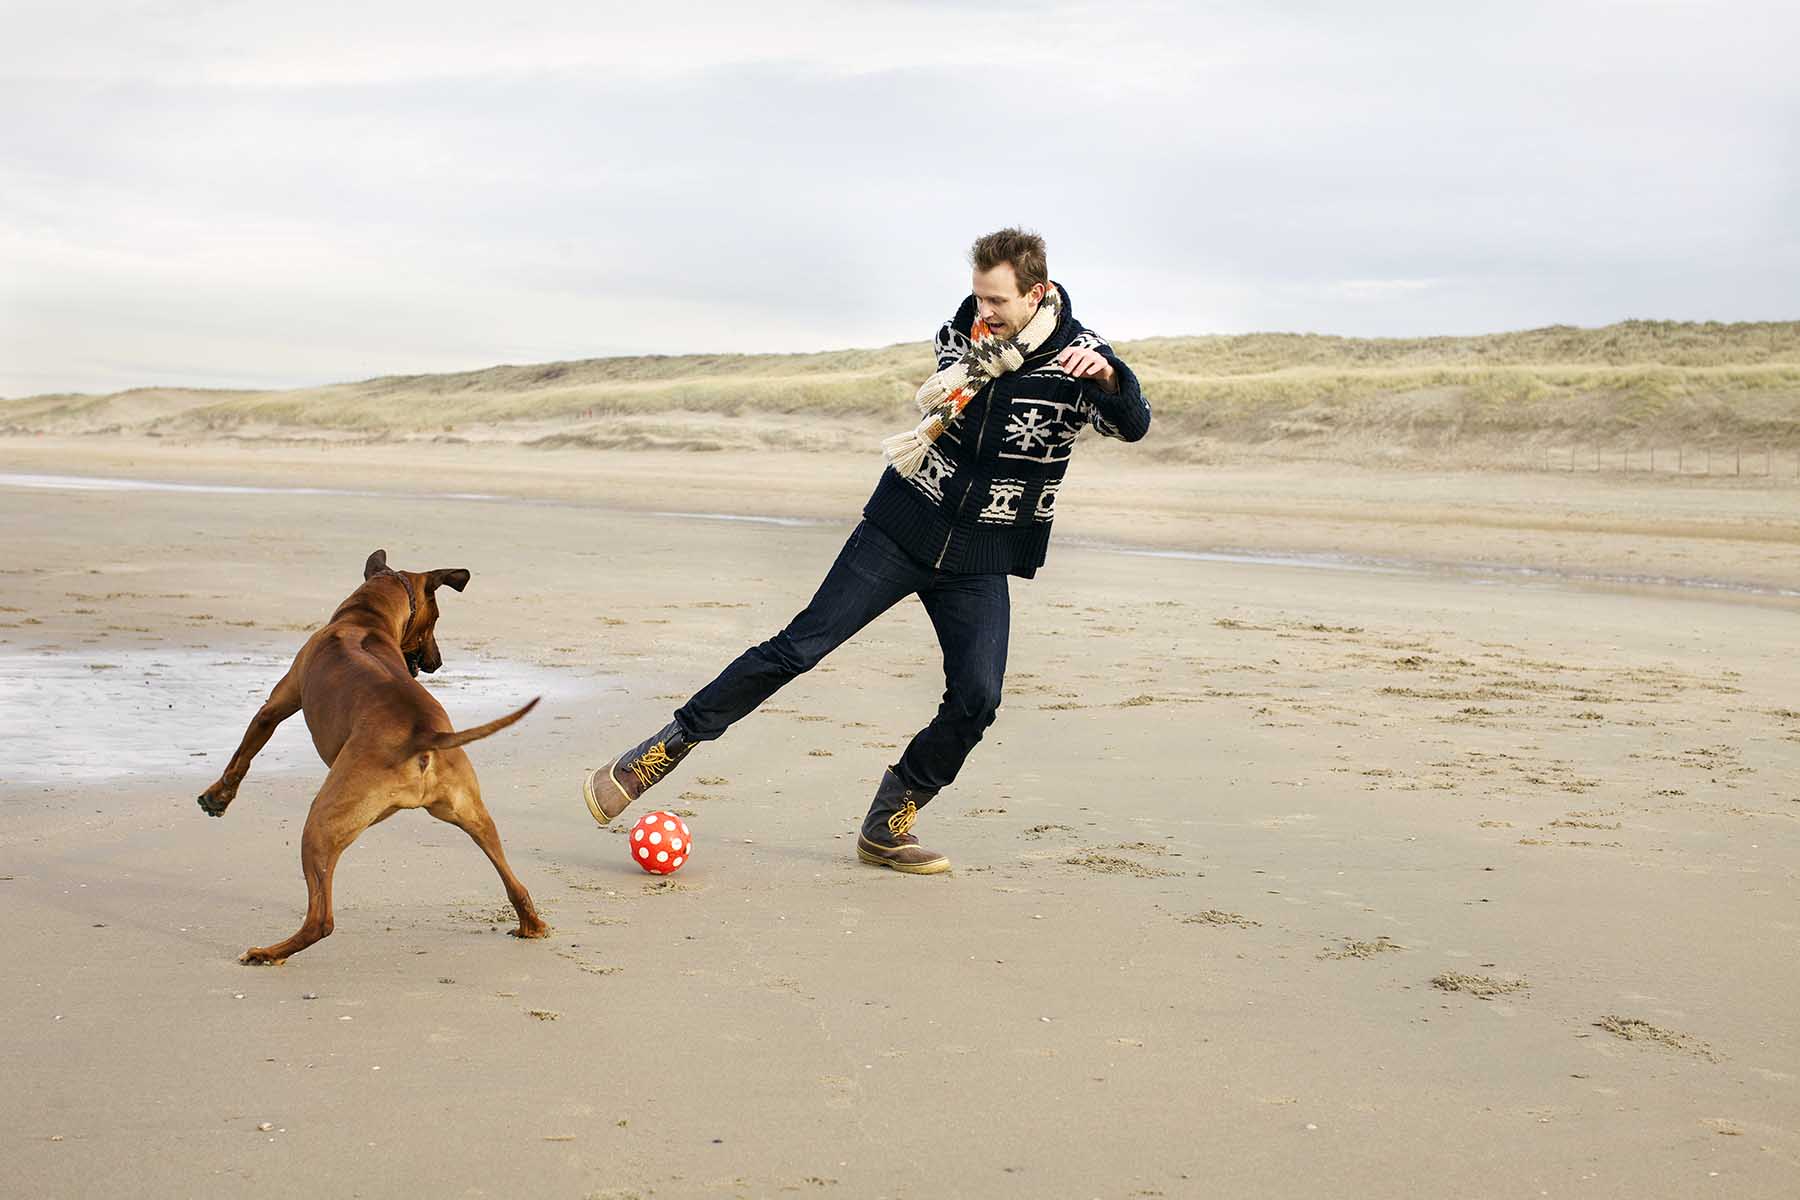 Man playing football with his dog at the beach of Bloemendaal aan Zee, the Netherlands.